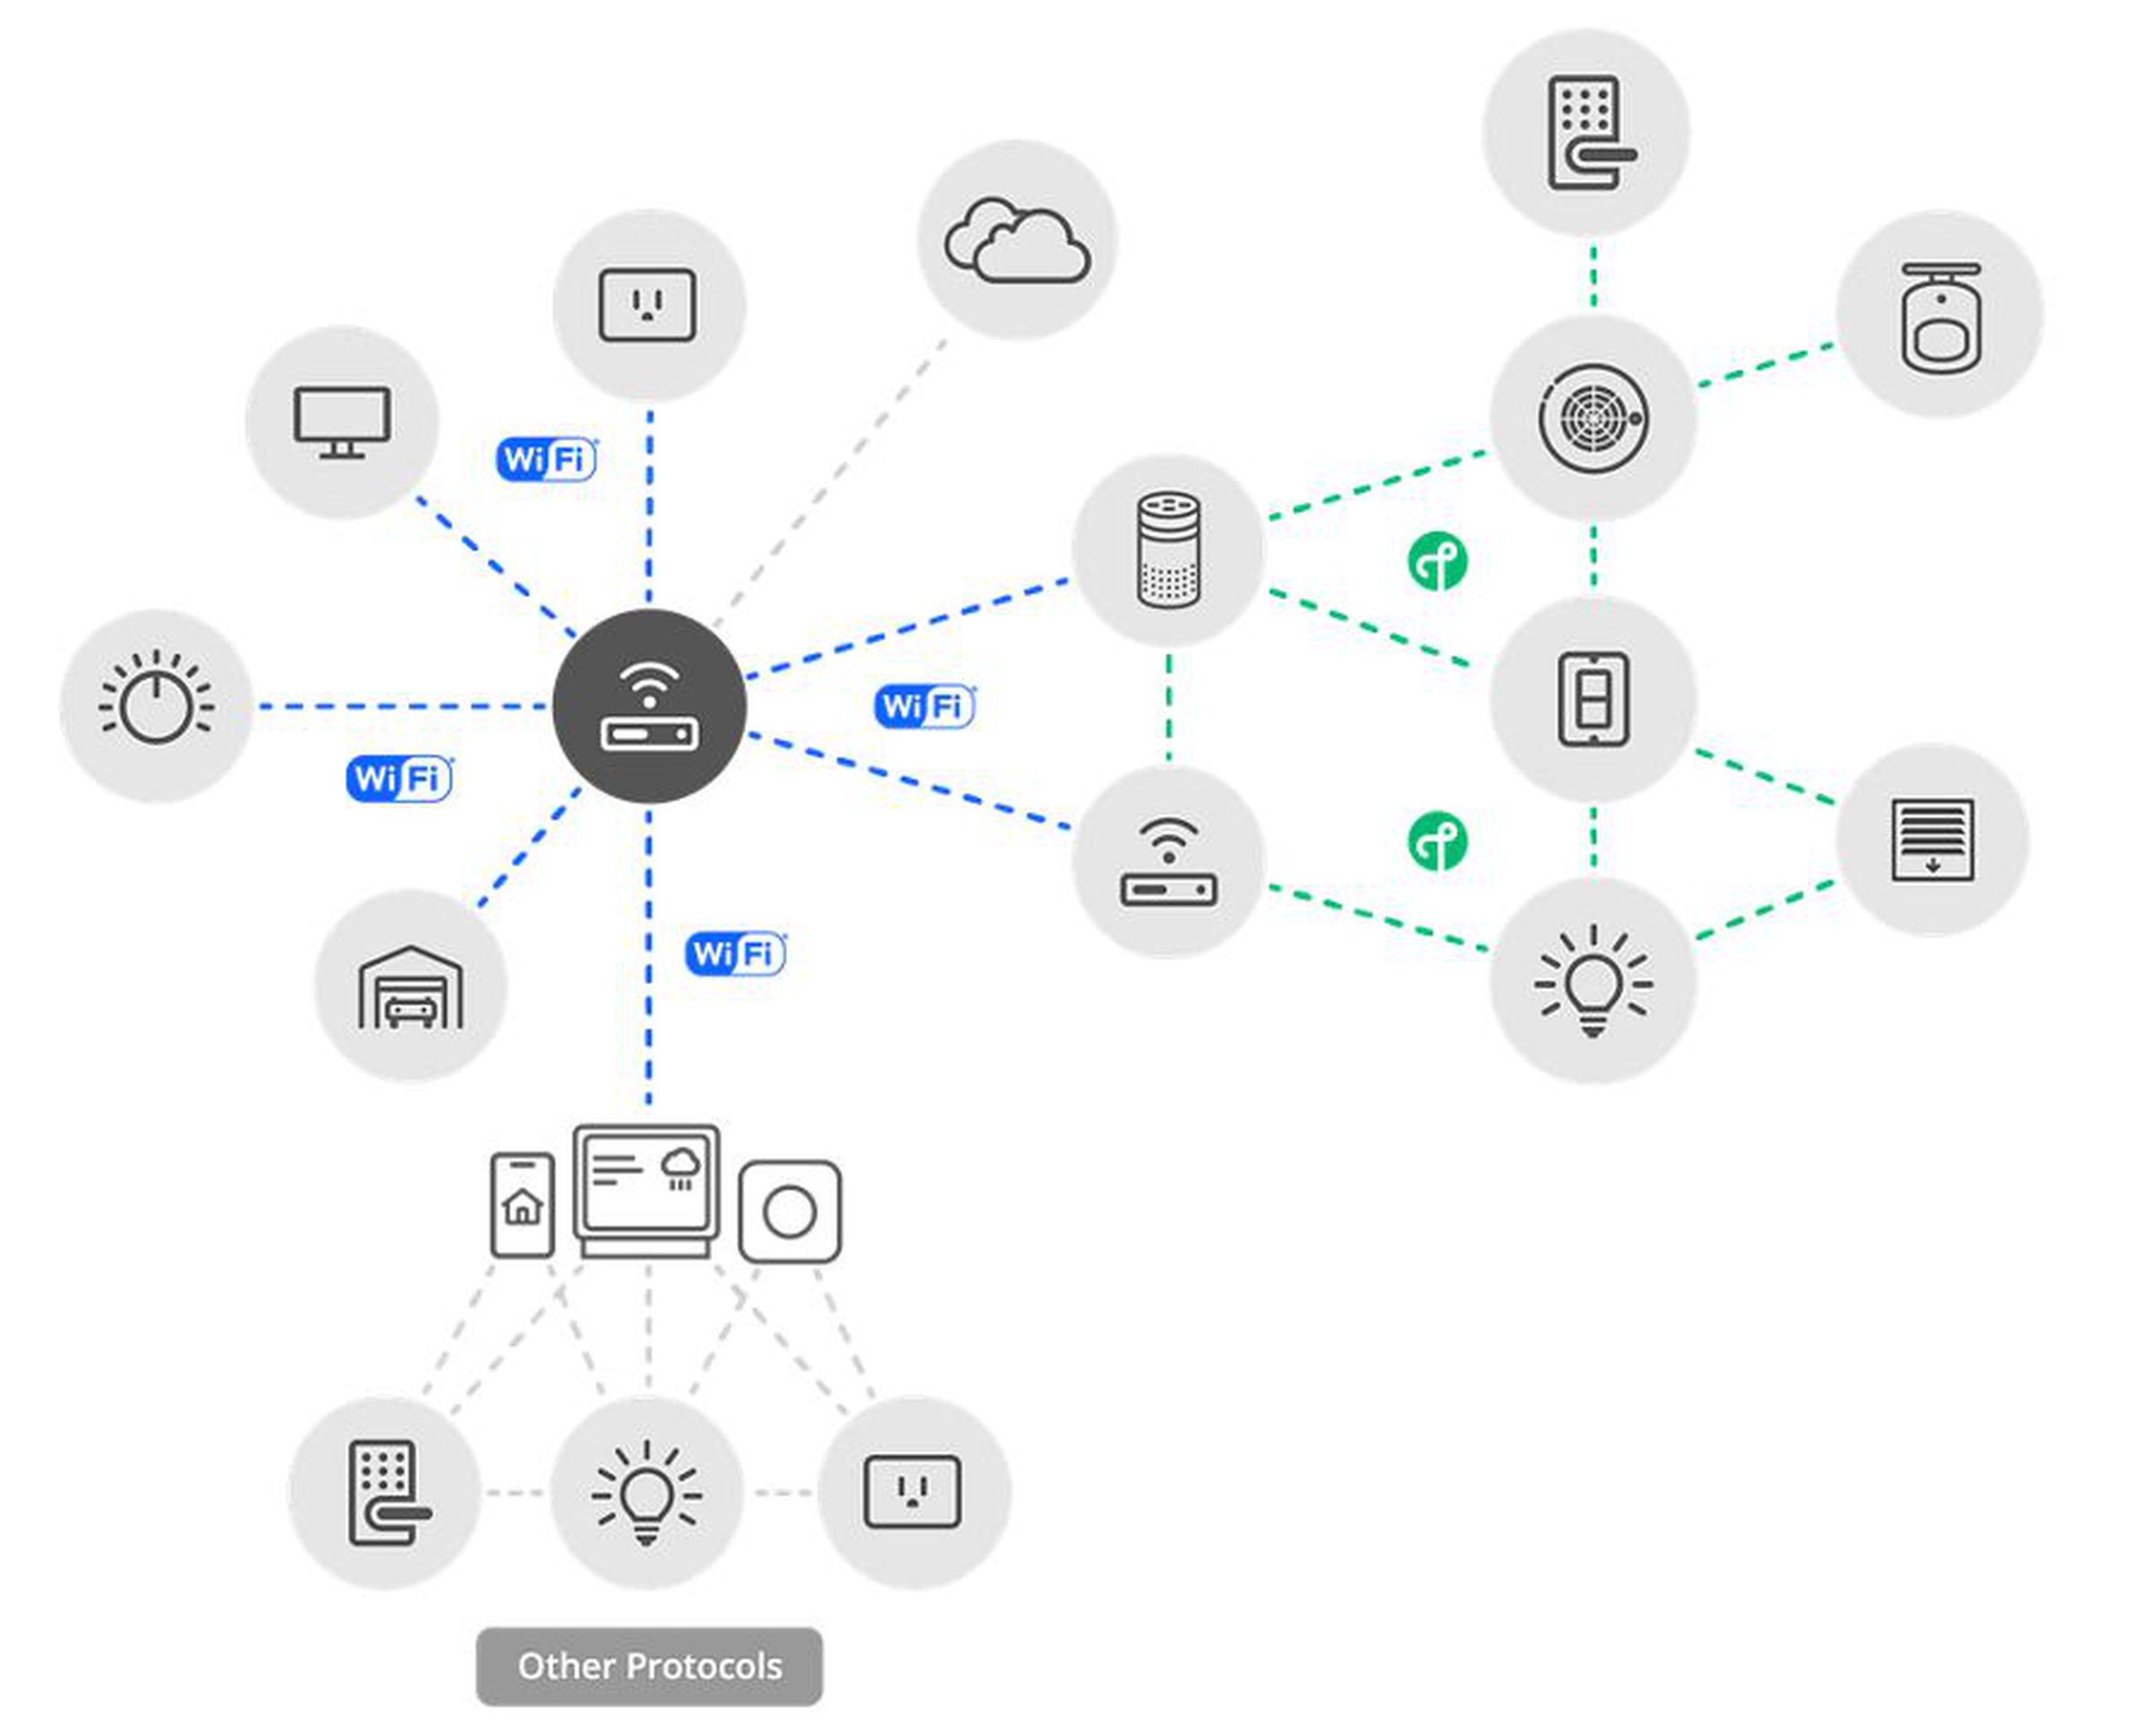 A Matter network map shows how devices will connect to each other, to the internet, and to other protocols using Wi-Fi, Thread, and Matter controllers.